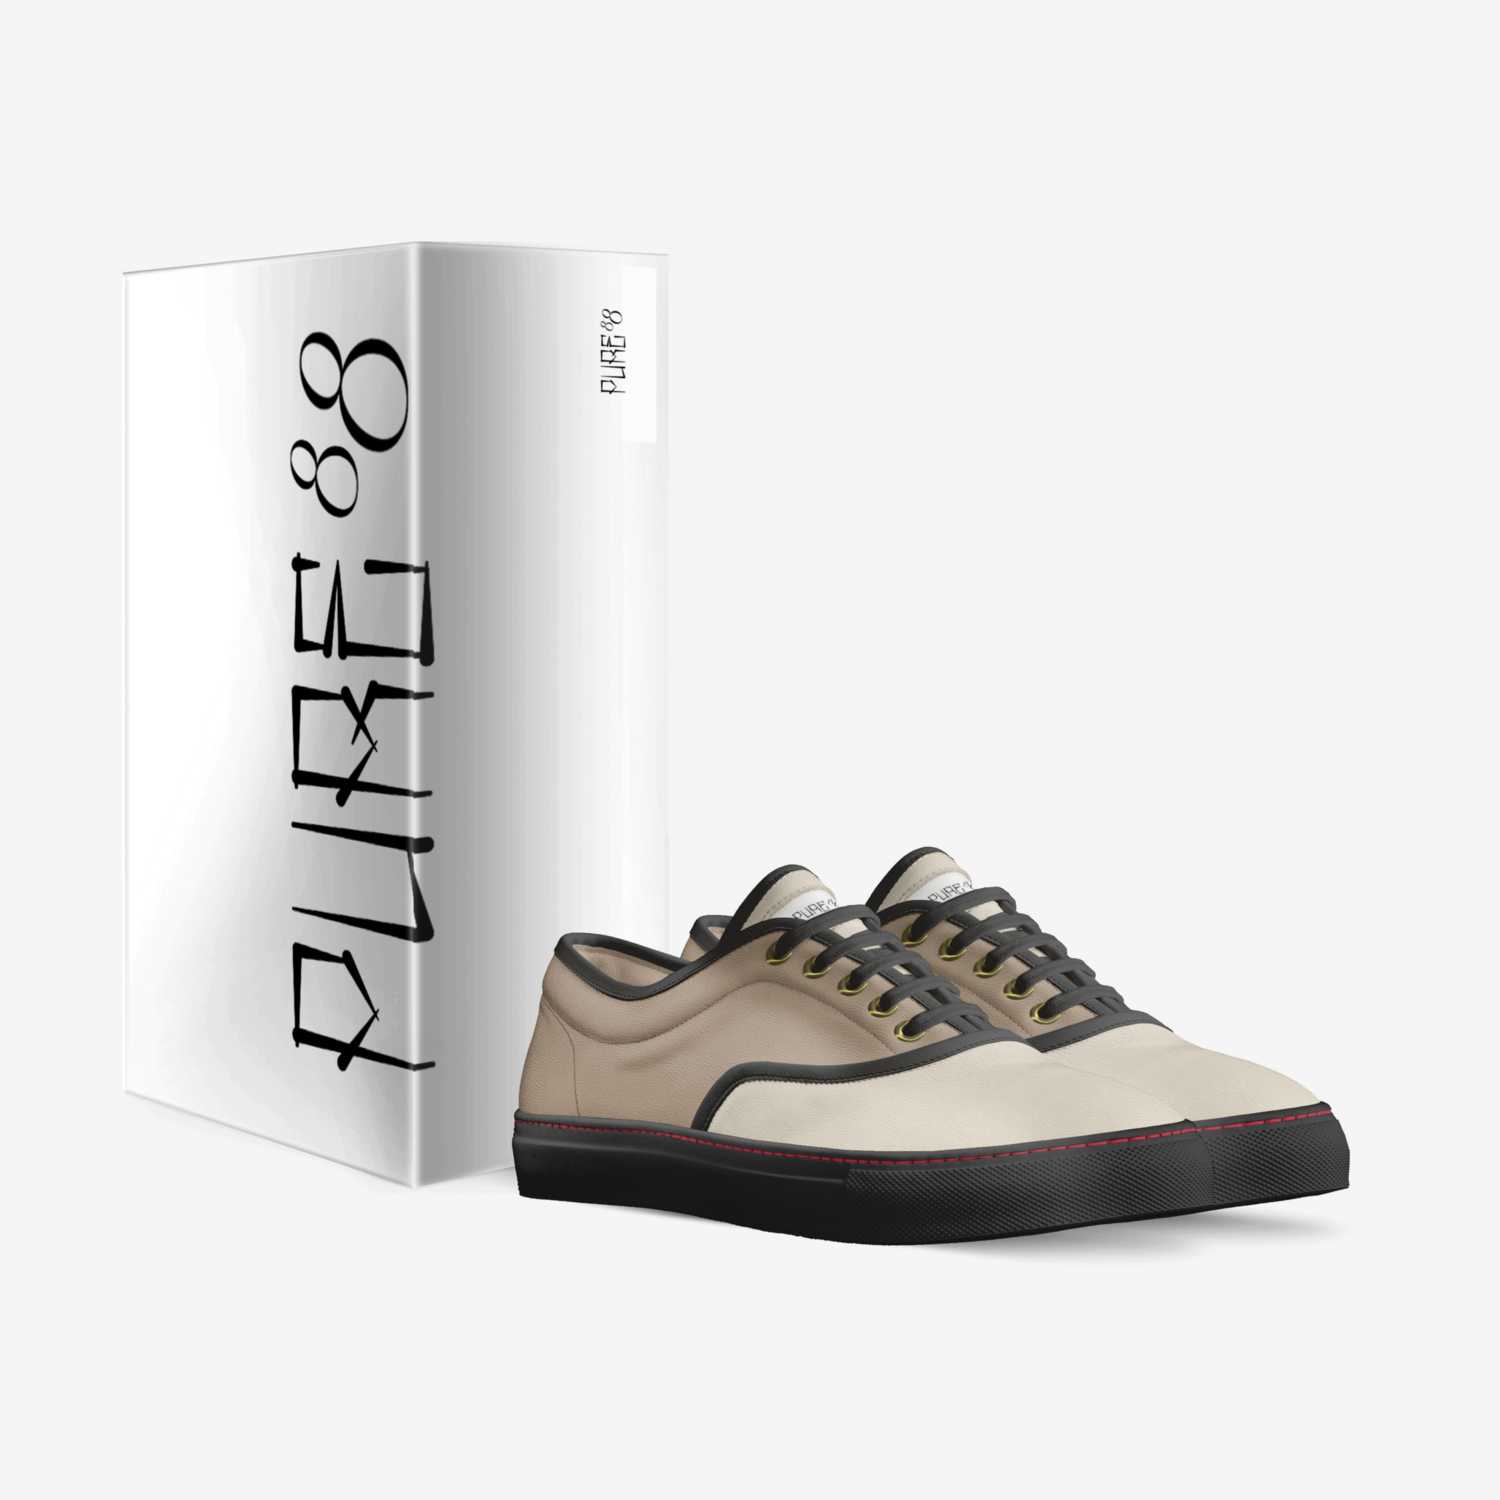 Pure 88 custom made in Italy shoes by Phillip Lopez | Box view